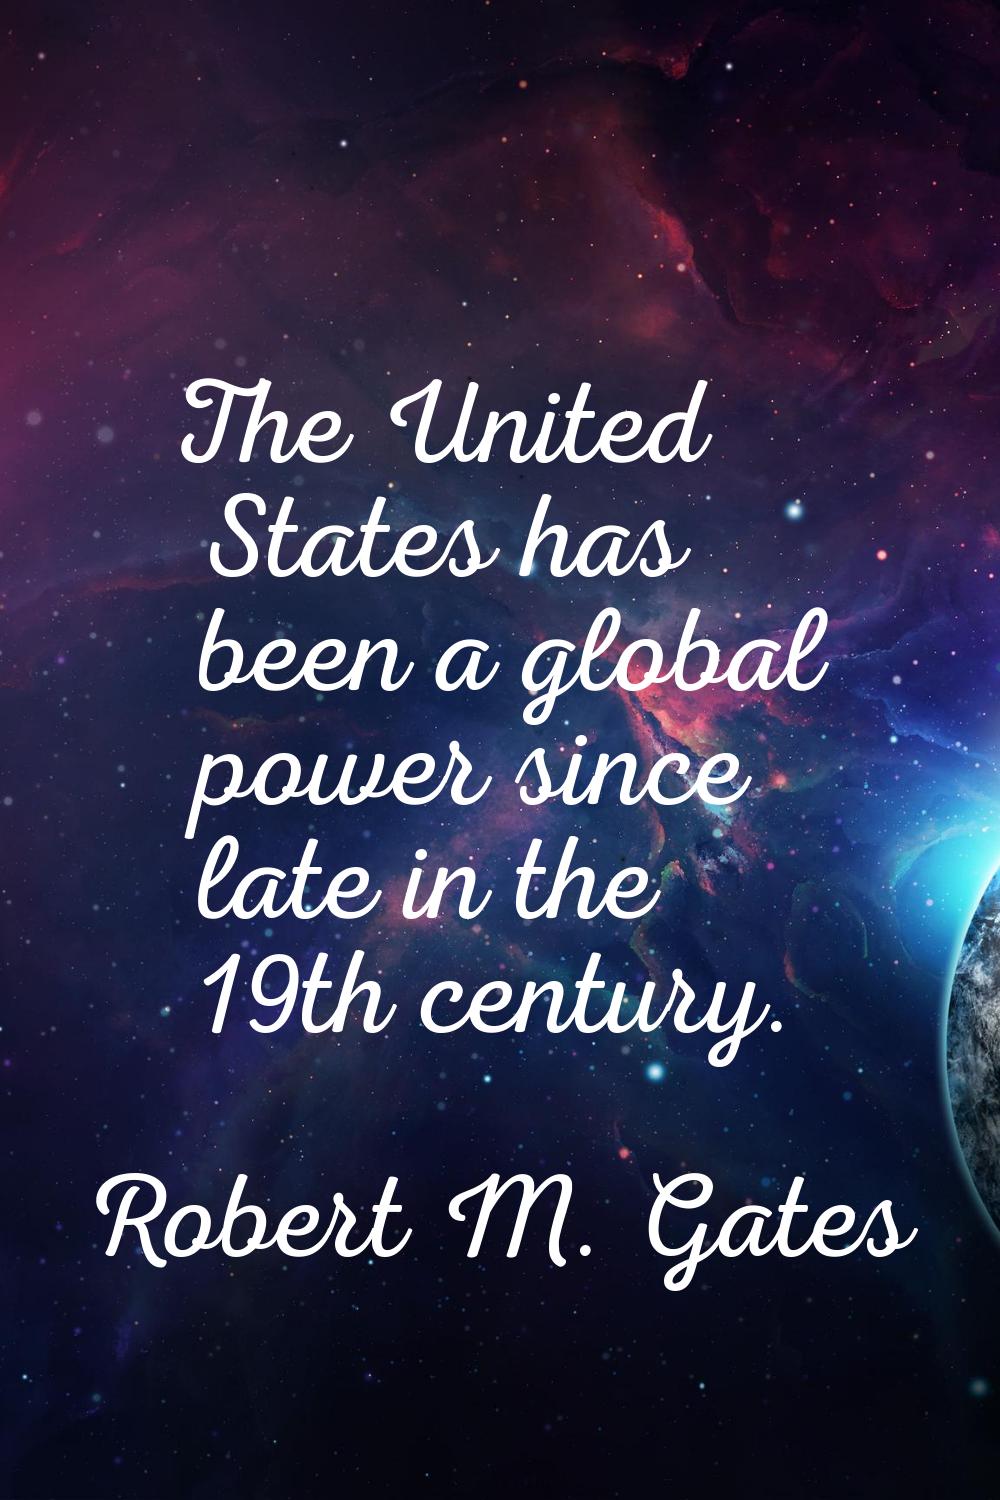 The United States has been a global power since late in the 19th century.